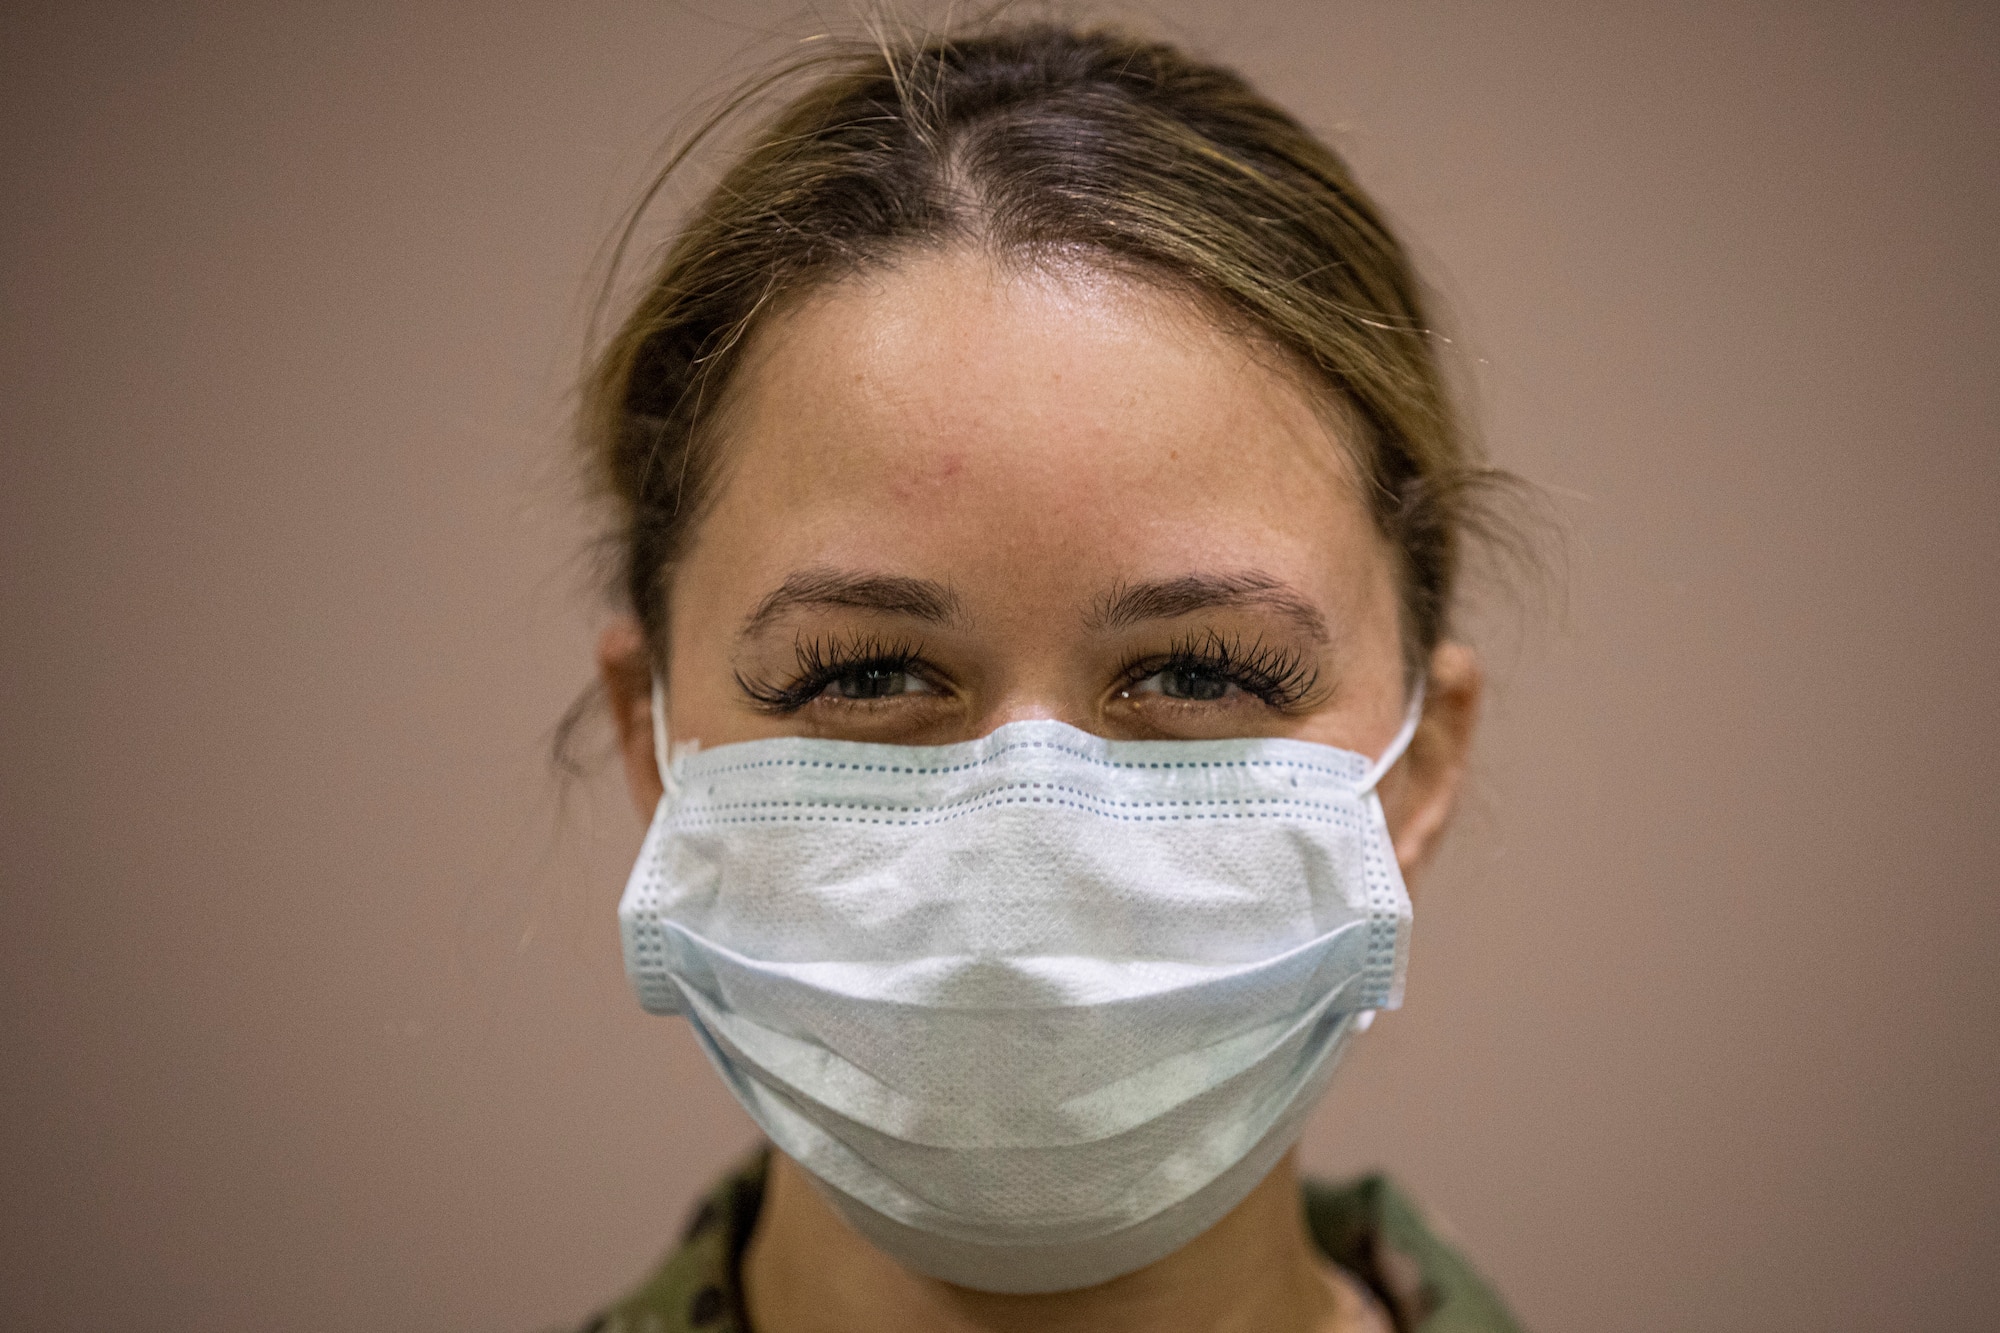 New Jersey Air National Guard Staff Sgt. Samantha Massey stands for a portrait during the buildup of a Field Medical Station at the Atlantic City Convention Center in Atlantic City, N.J., April 9, 2020.  Atlantic City is one of three stations that will offer overflow from local hospitals focused on COVID-19 patients. Massey is with the 177th Fighter Wing’s Aircraft Maintenance Squadron. (U.S. Air National Guard photo by Master Sgt. Matt Hecht)